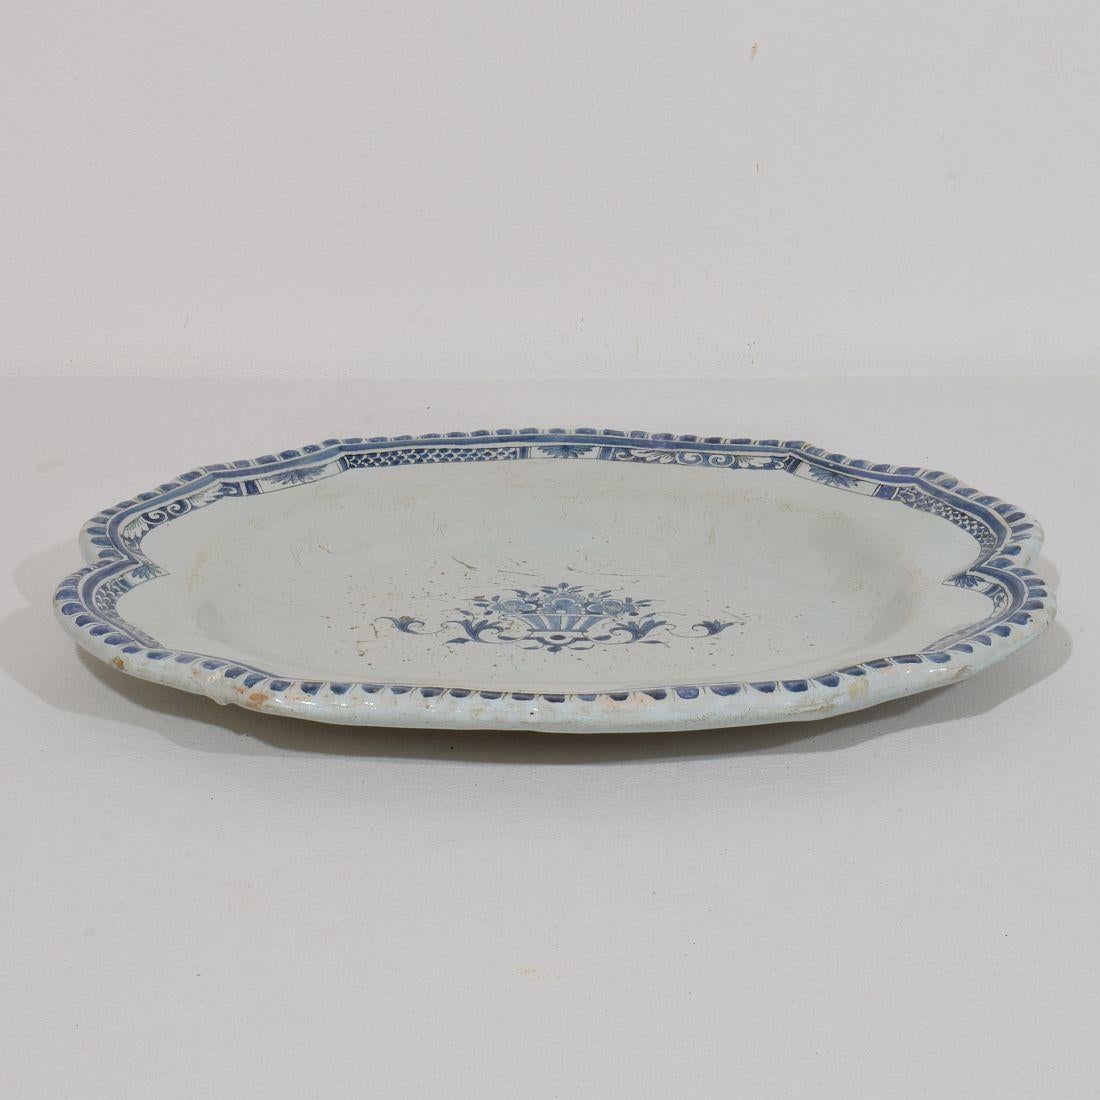 French, 18th Century Glazed Earthenware Rouen Platter For Sale 5